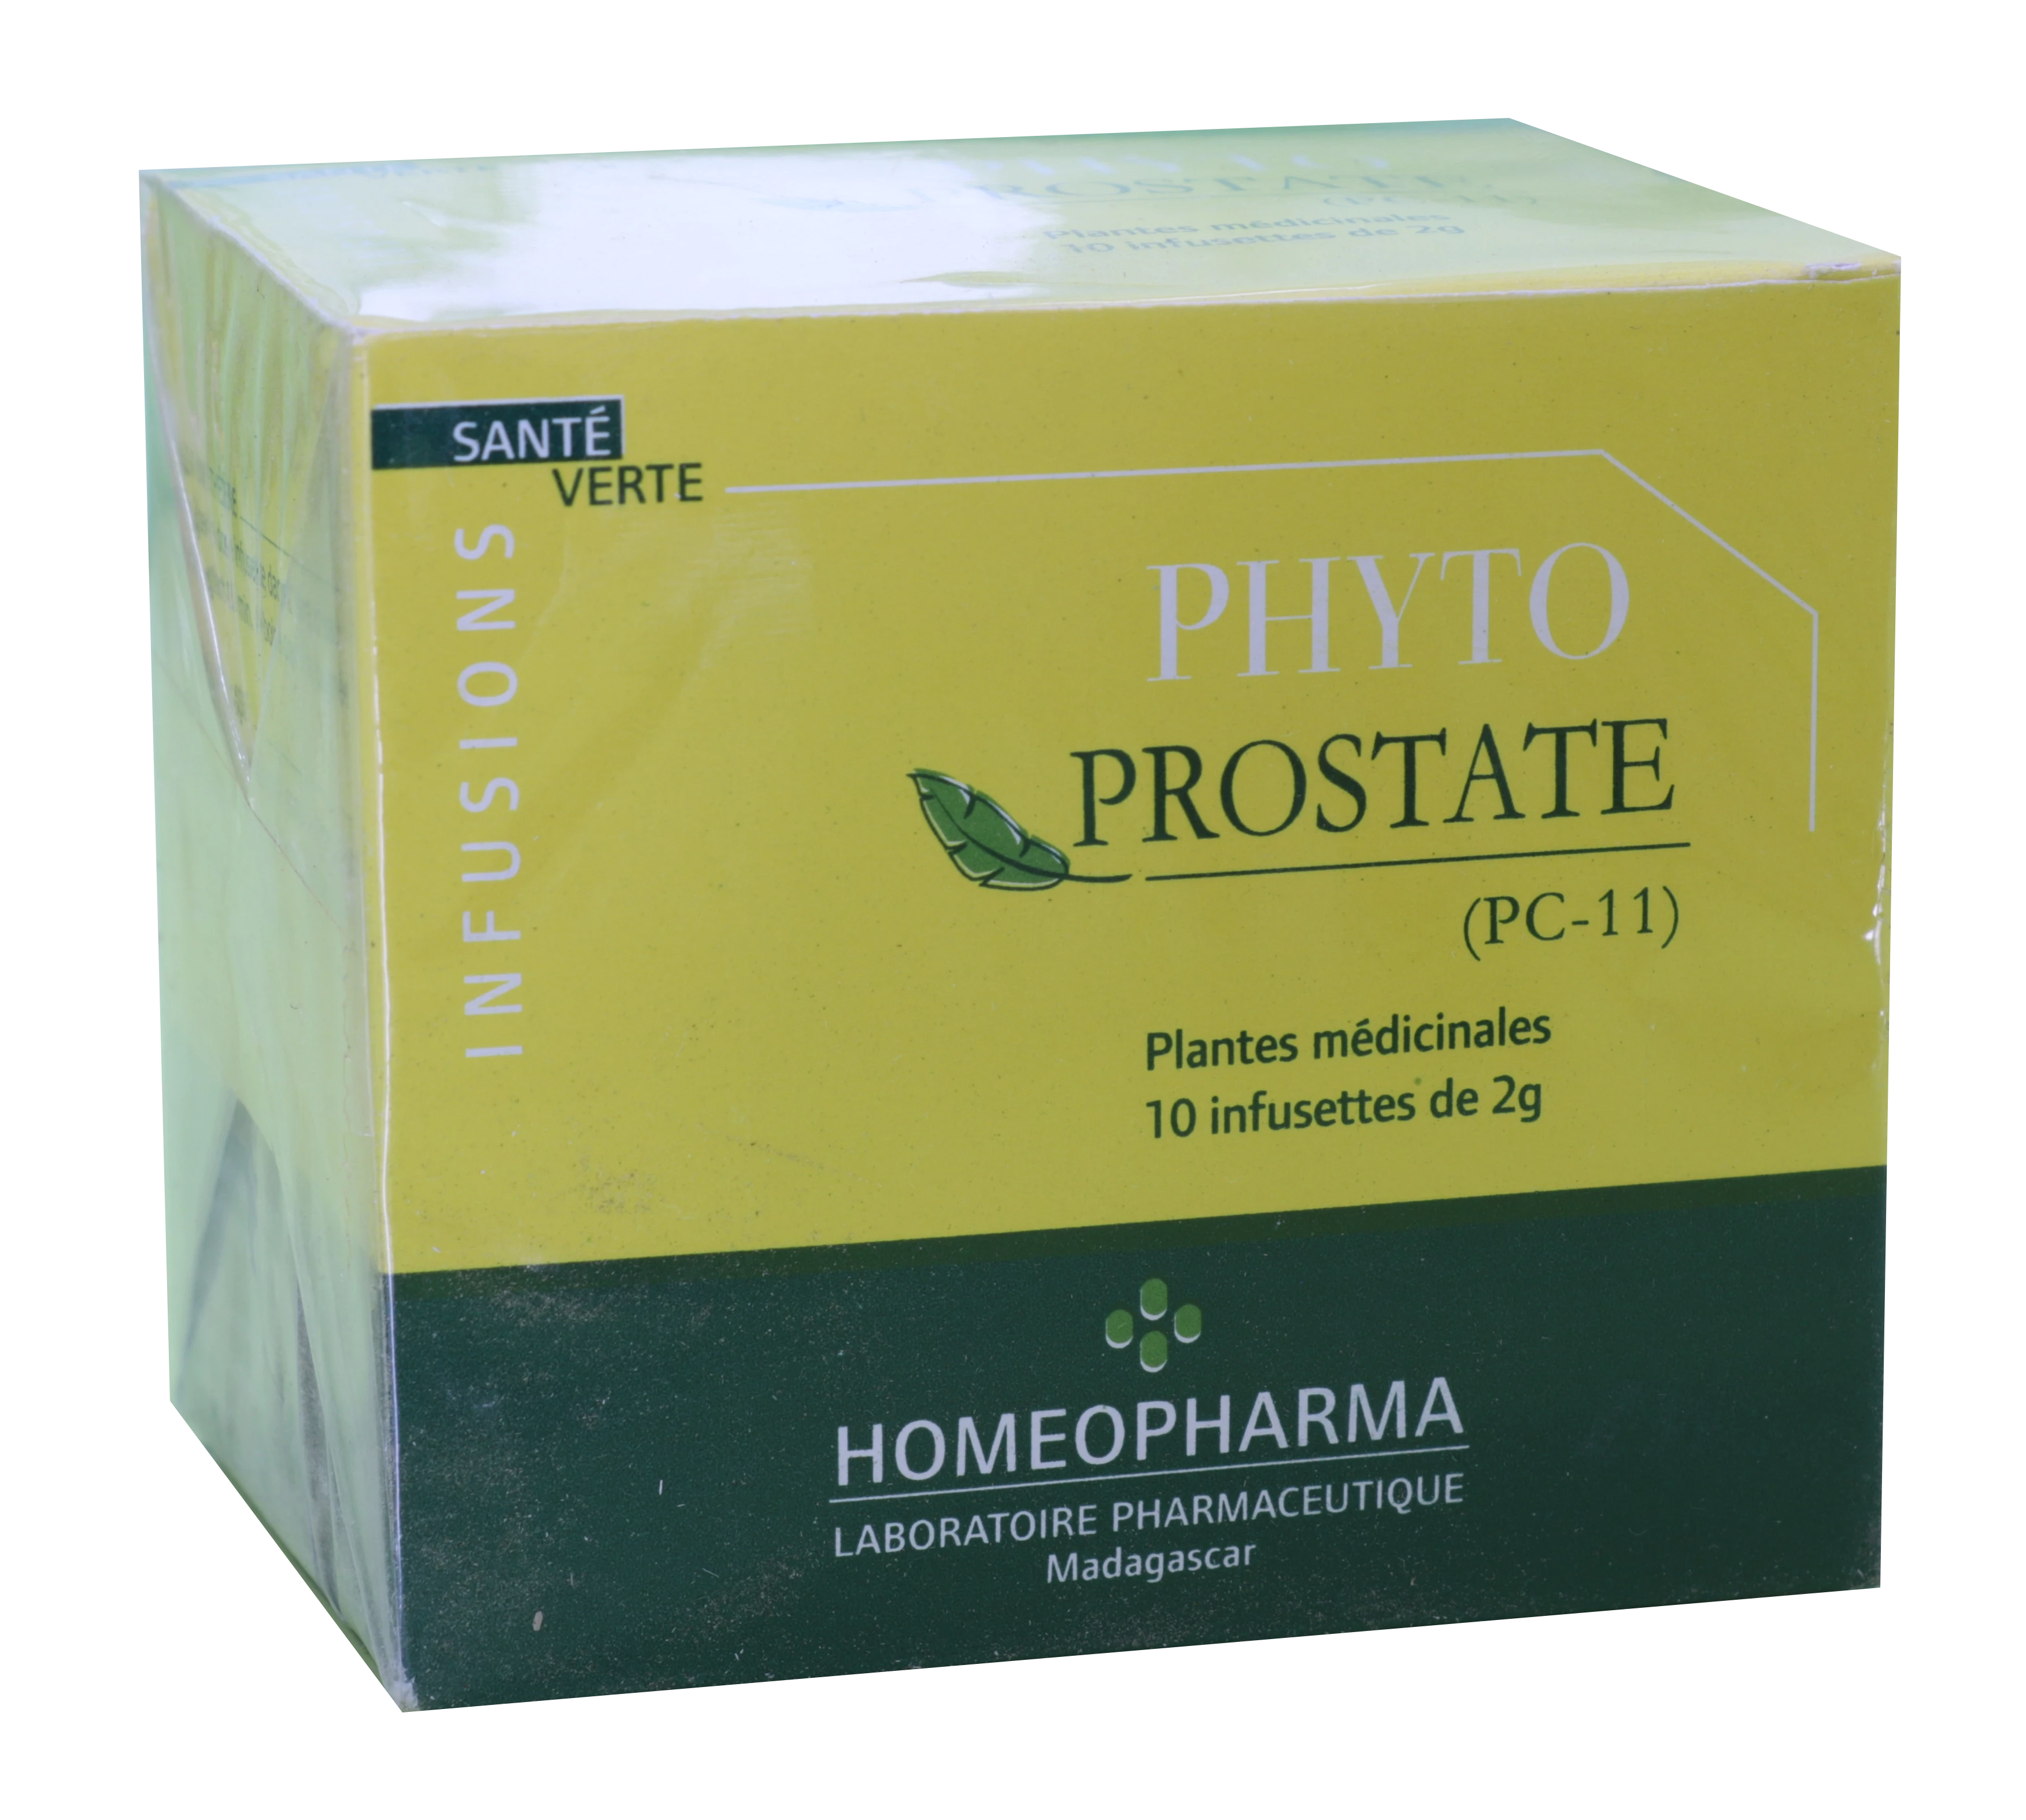 Phytotherapie Traditionnelle Pc11-Phyto-Prostata Bte 20 Infusetten - HOMEOPHARMA